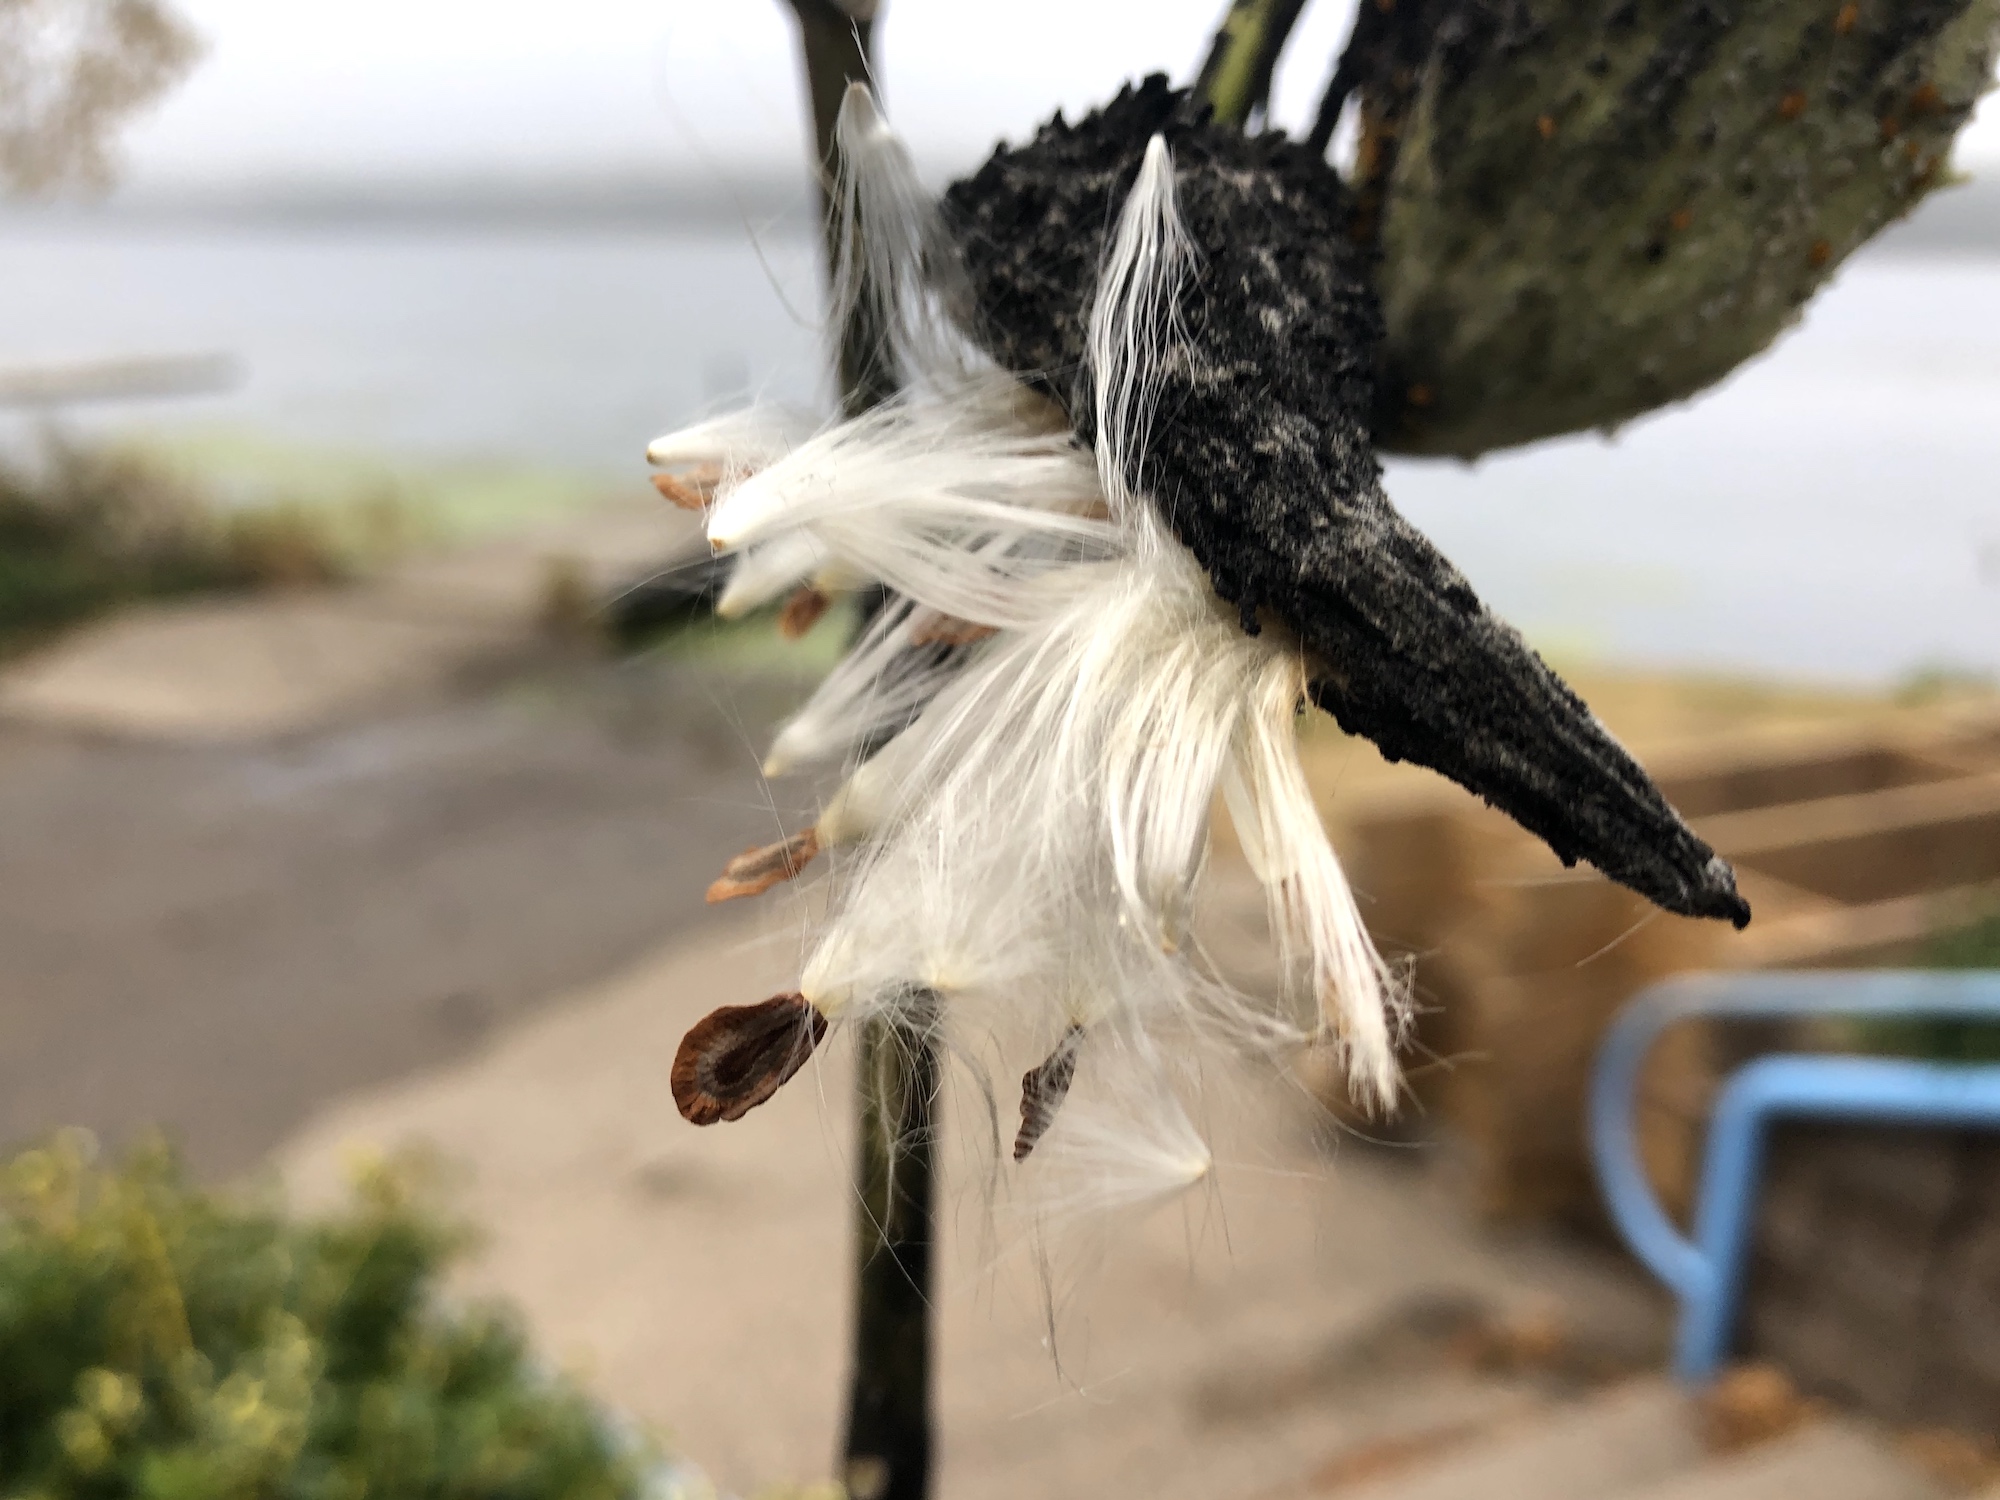 Common Milkweed by Wingra Boats on October 20, 2019.